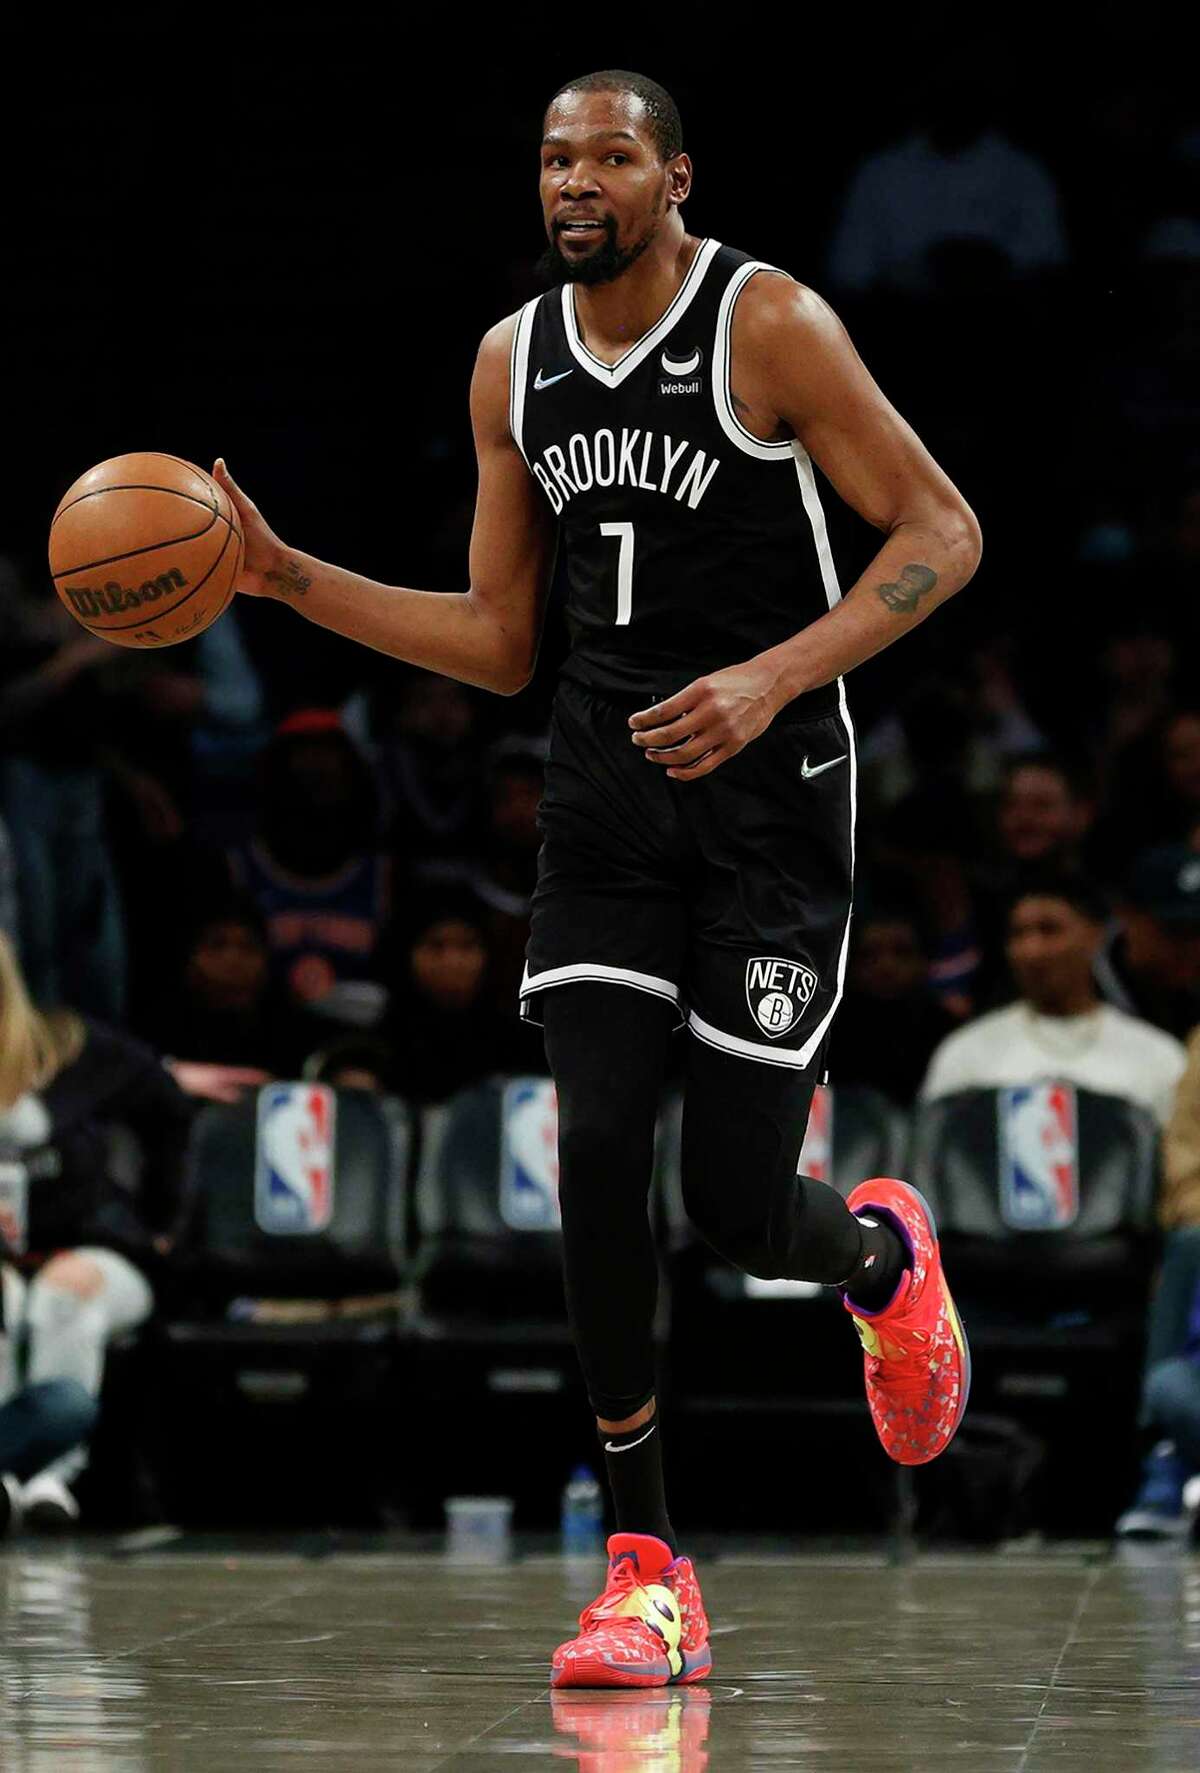 Nets forward Kevin Durant dribbles during the first half against the New York Knicks at Barclays Center on March 13. He averaged 29.9 points, 7.4 rebounds and 6.4 assists last season.